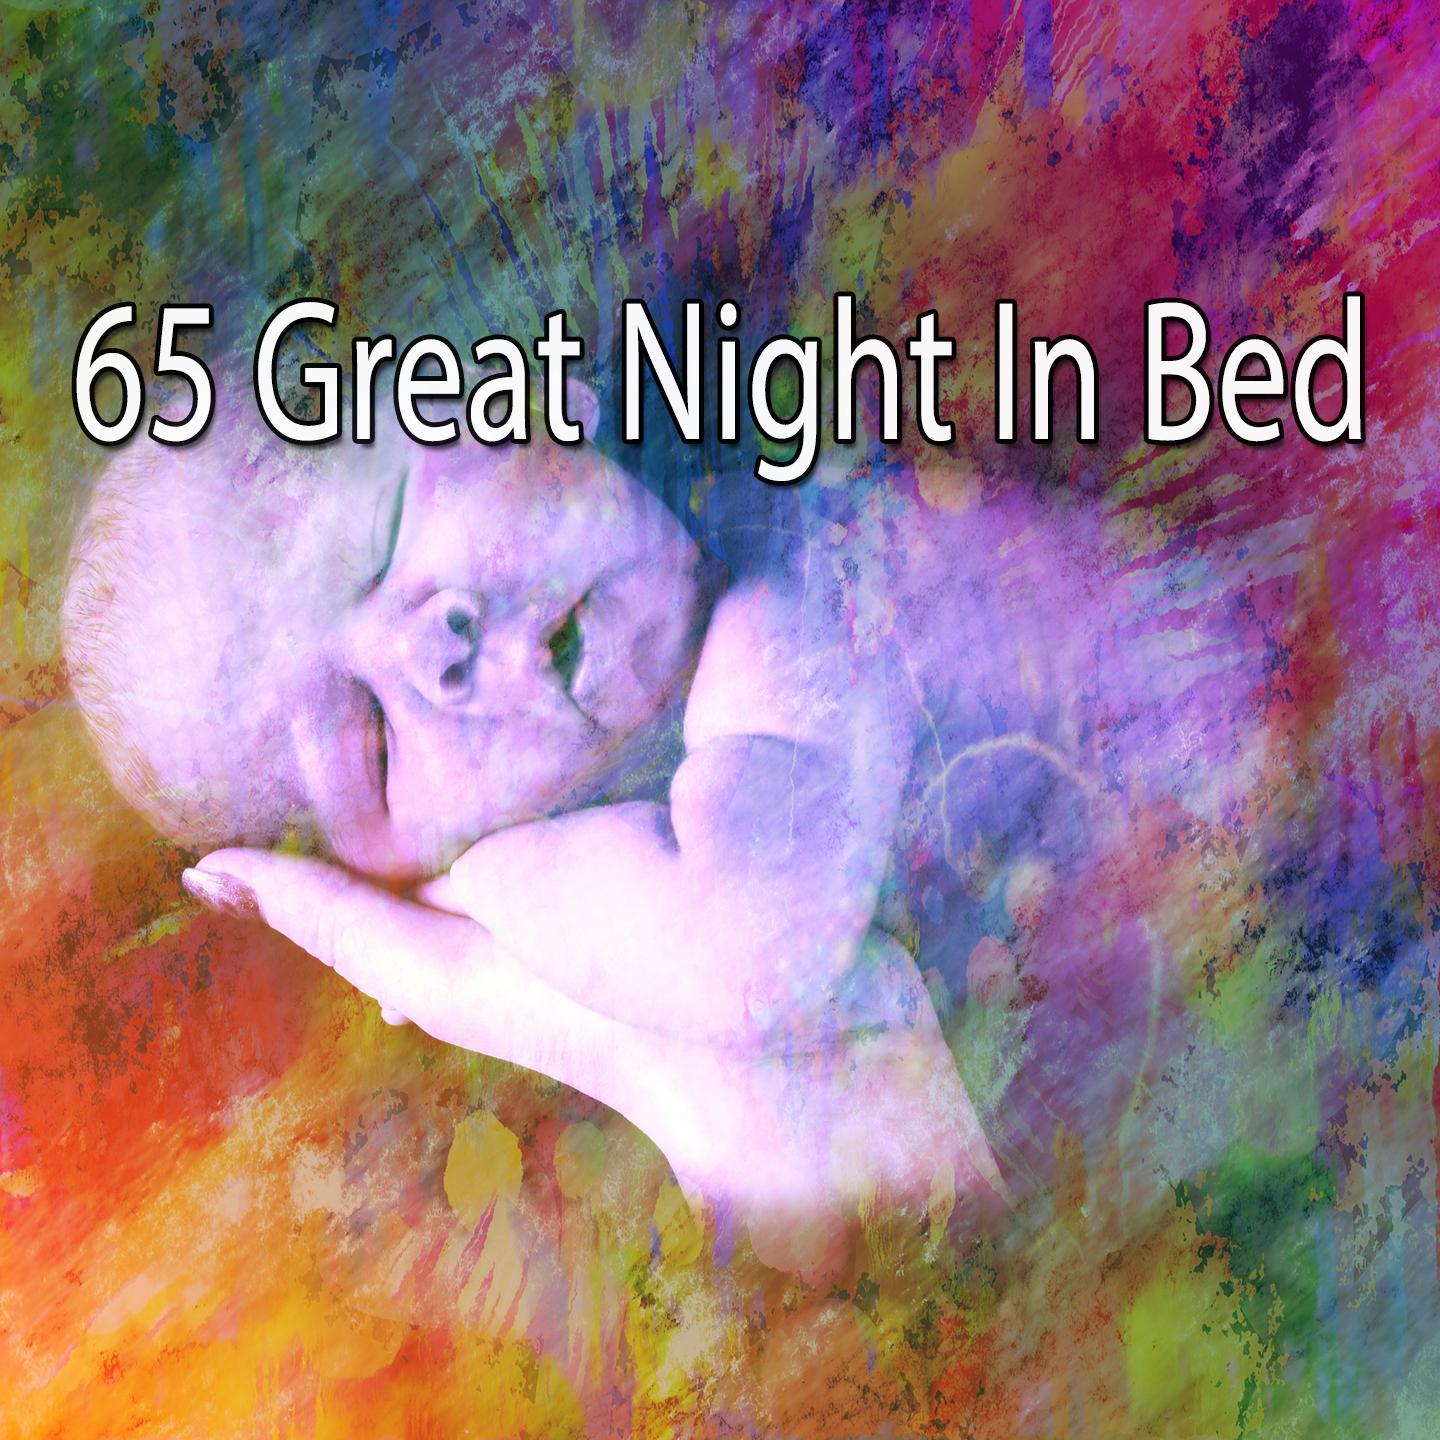 65 Great Night in Bed